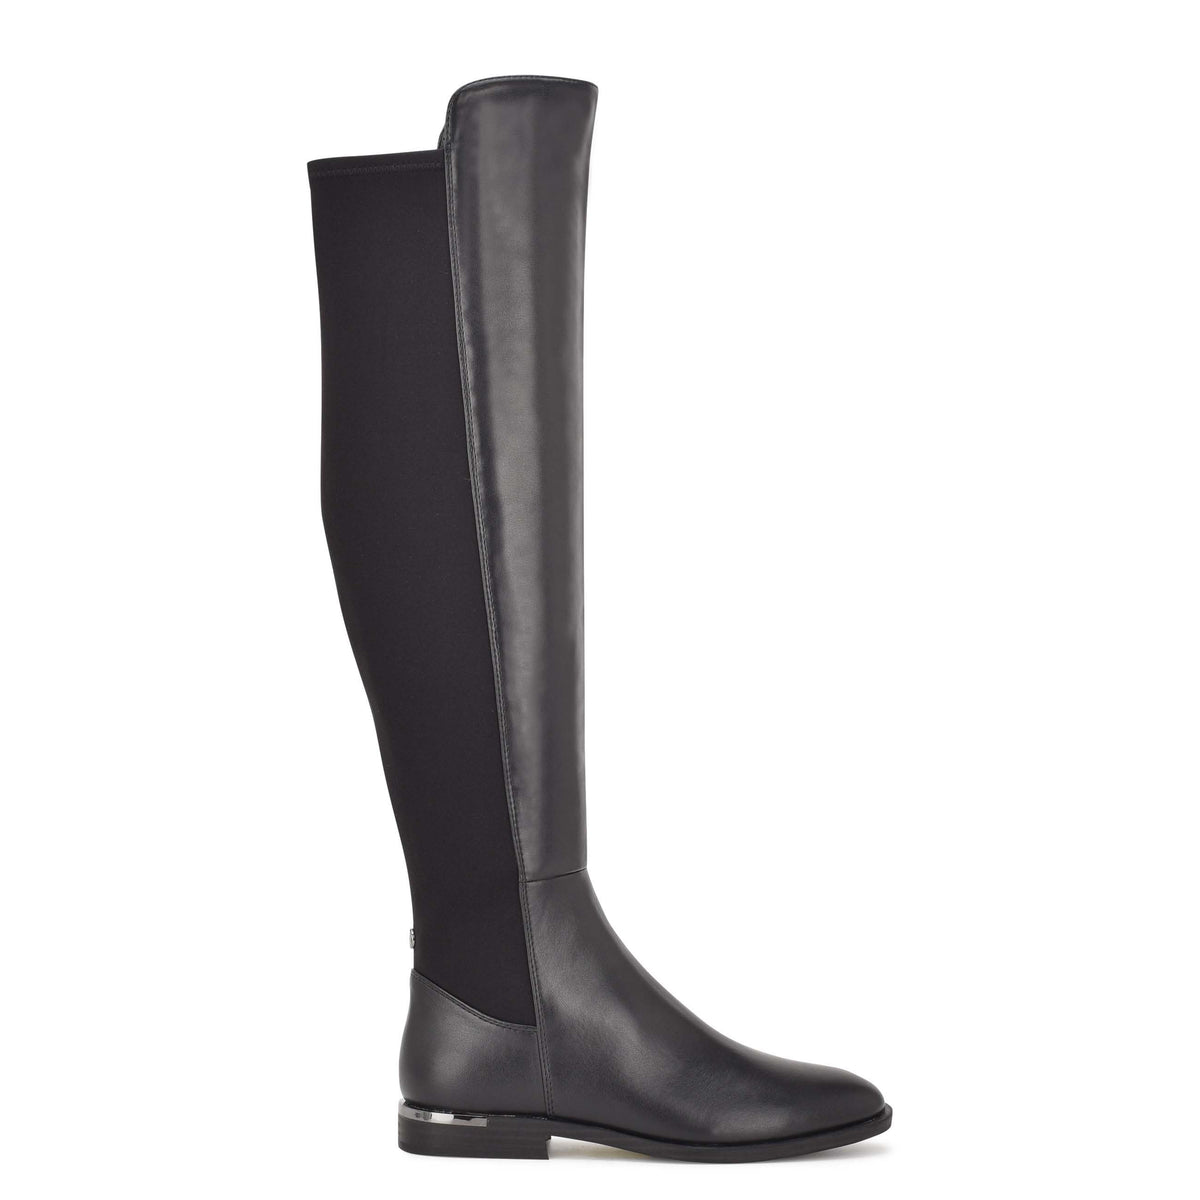 Allair Stretch Back Over the Knee Boots